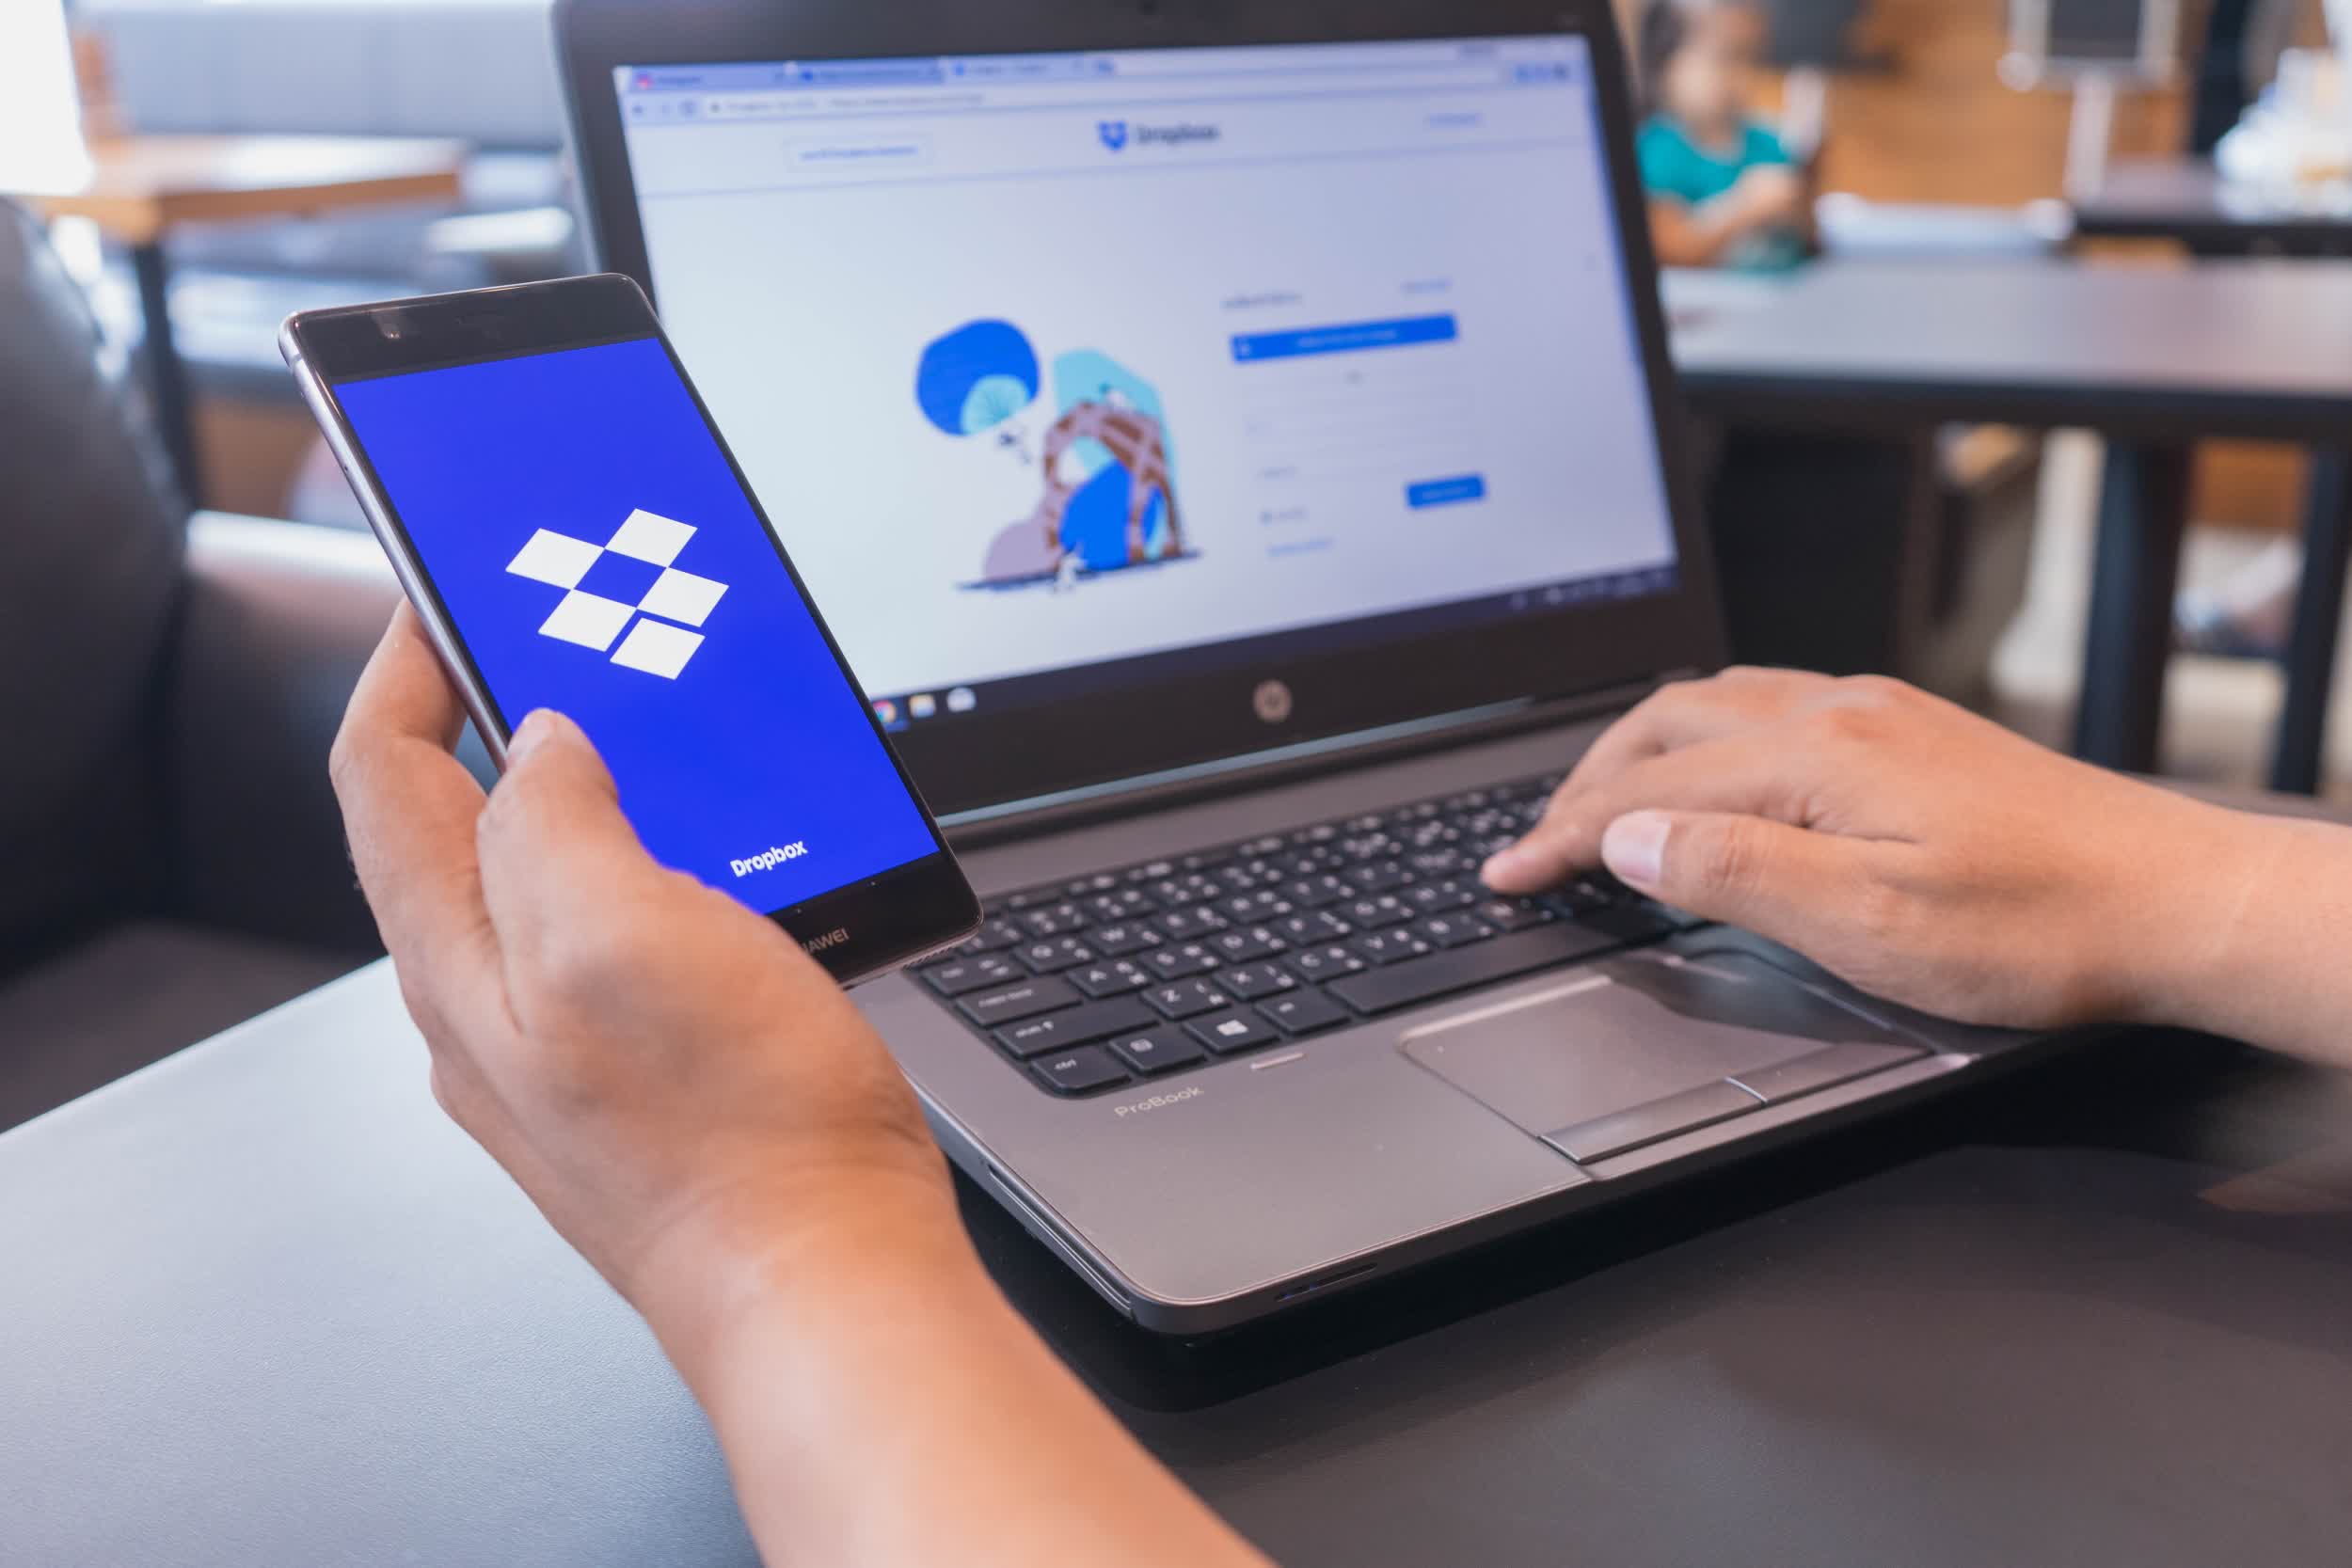 Dropbox is launching a free version of its password manager in April, but with restrictions